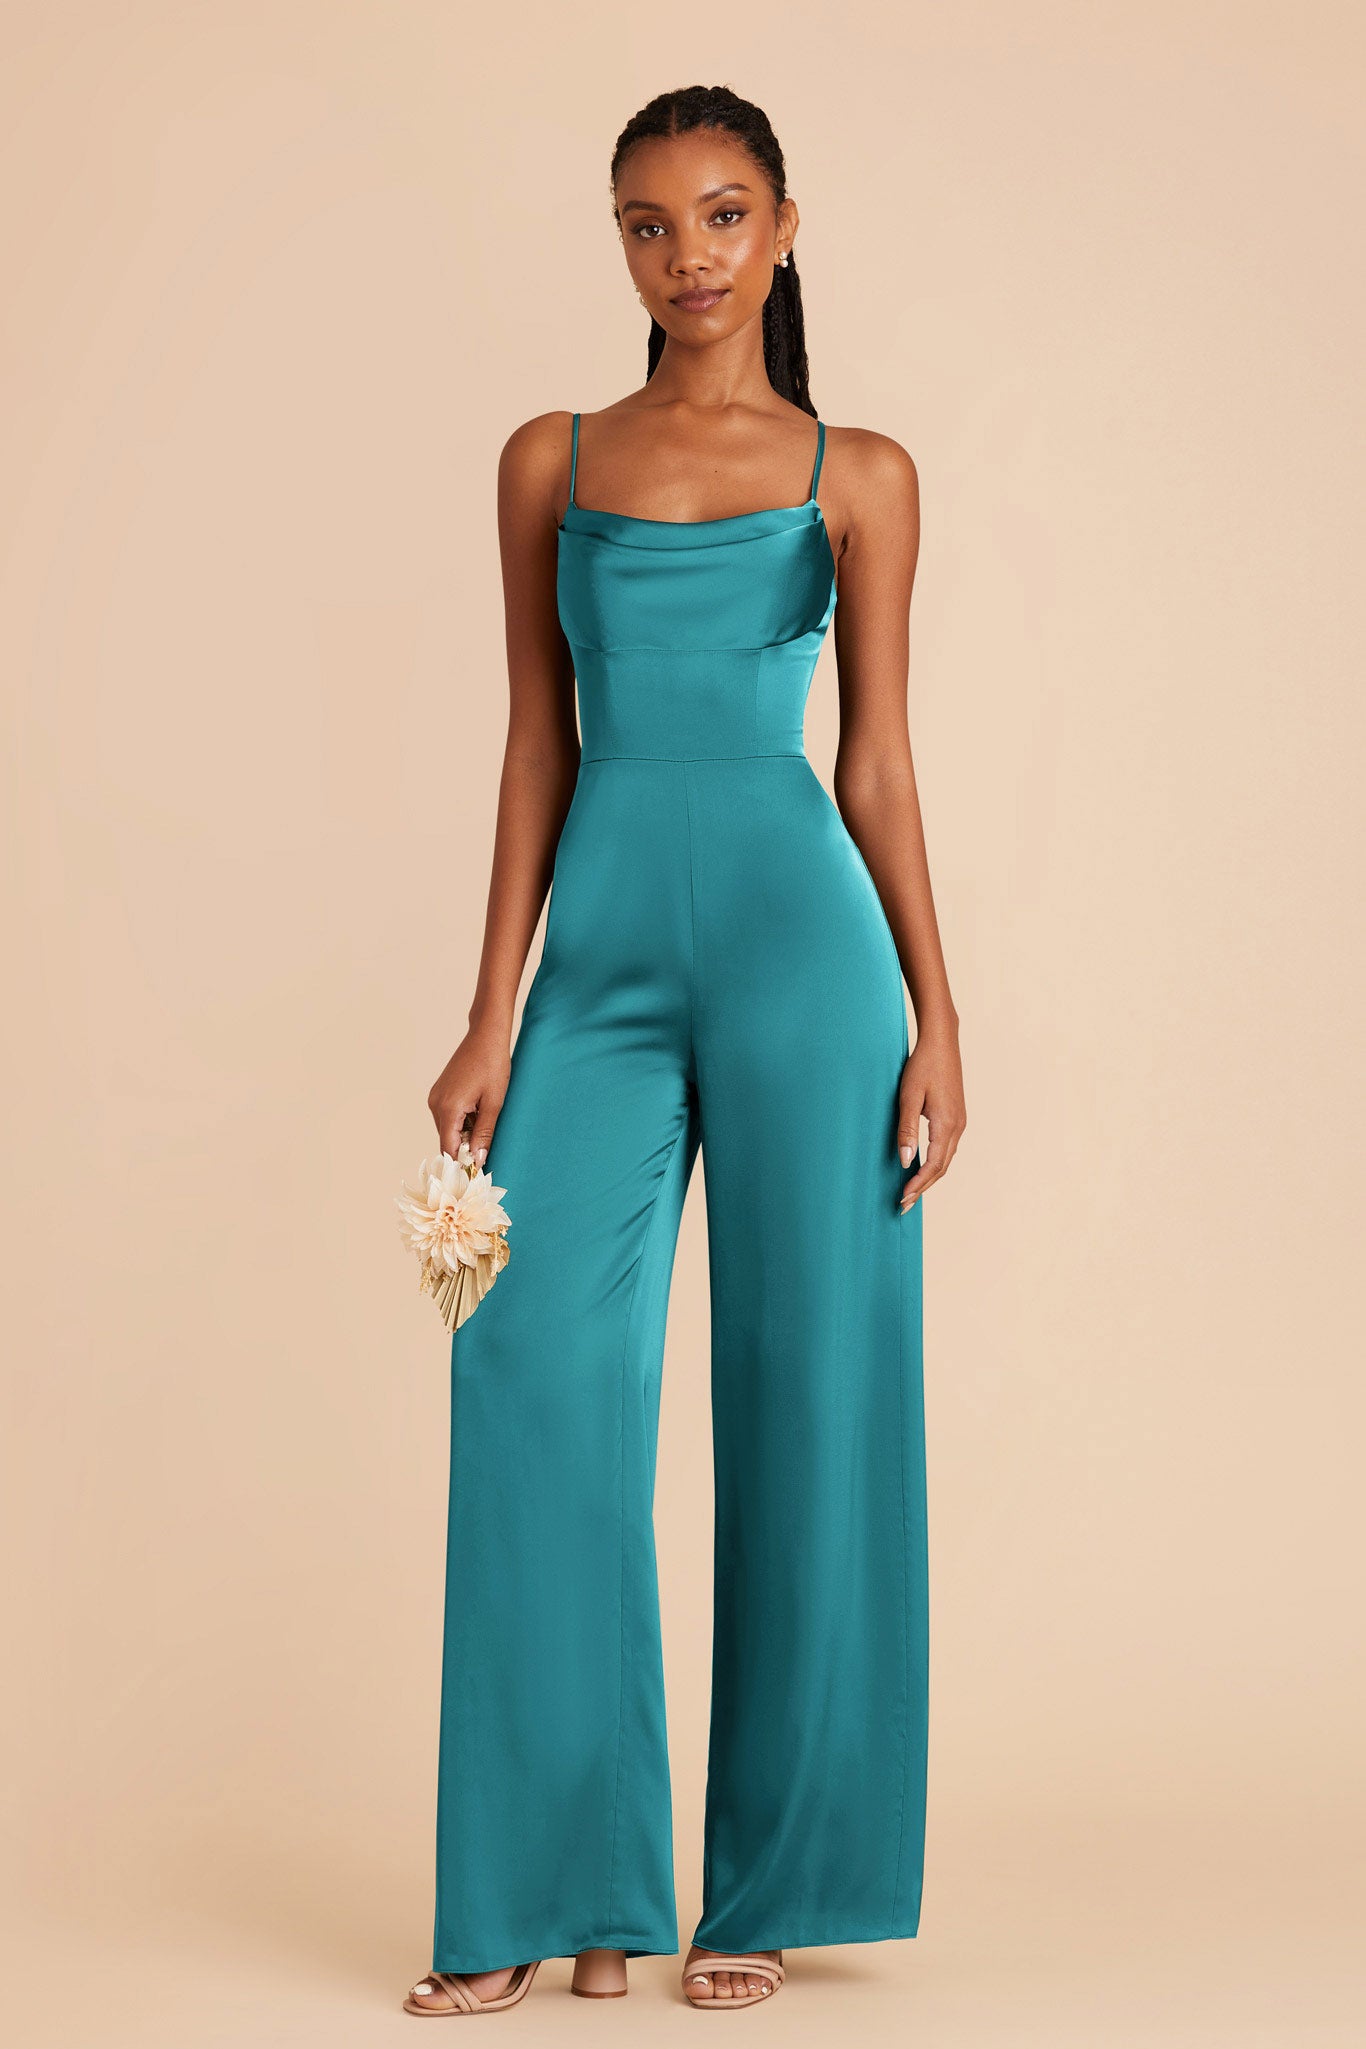 Teal Donna Matte Satin Bridesmaid Jumpsuit by Birdy Grey